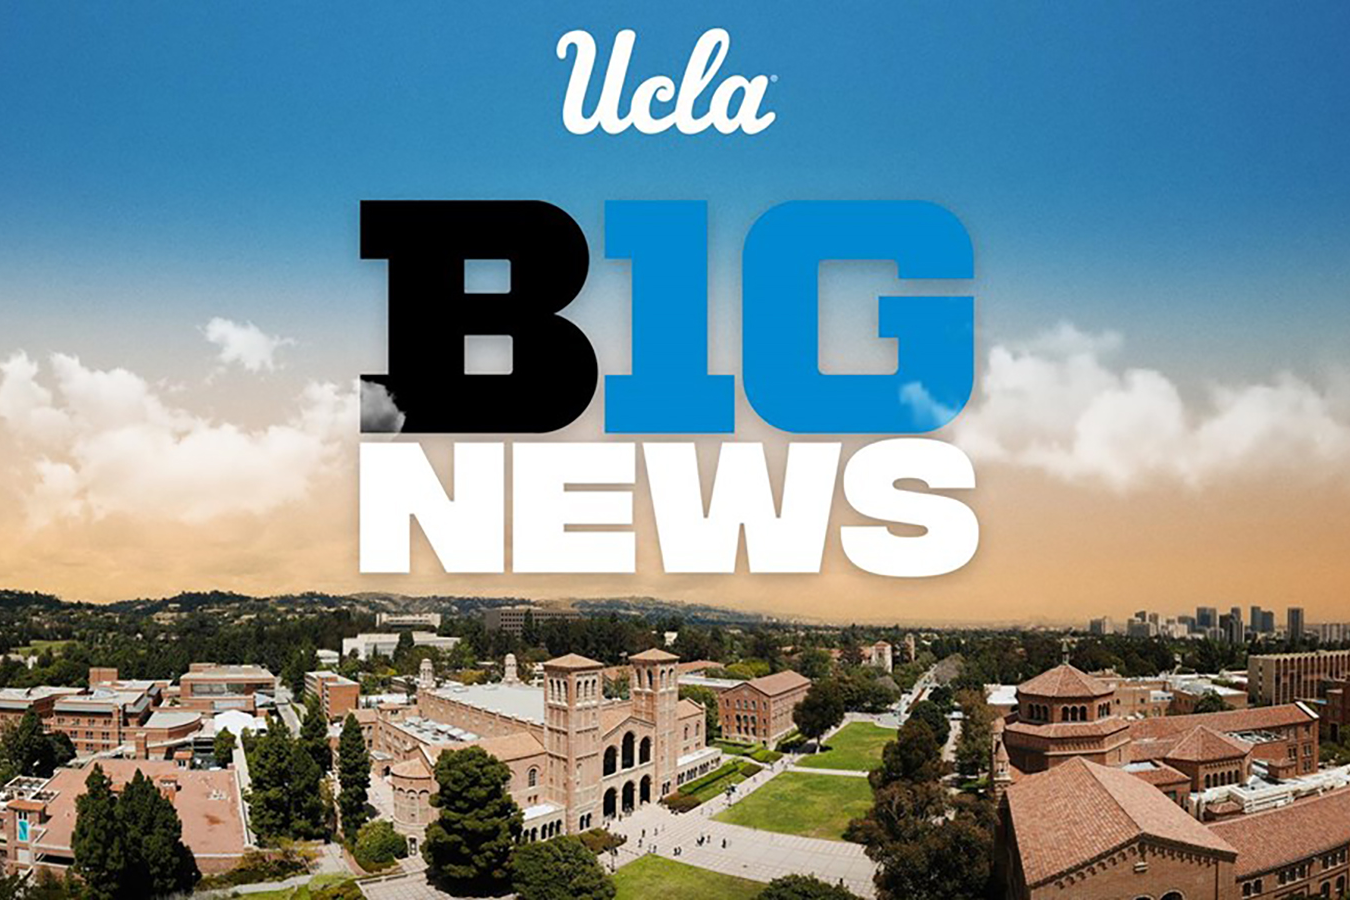 Graphic featuring aerial shot of UCLA campus with words “UCLA Big News” overlayed